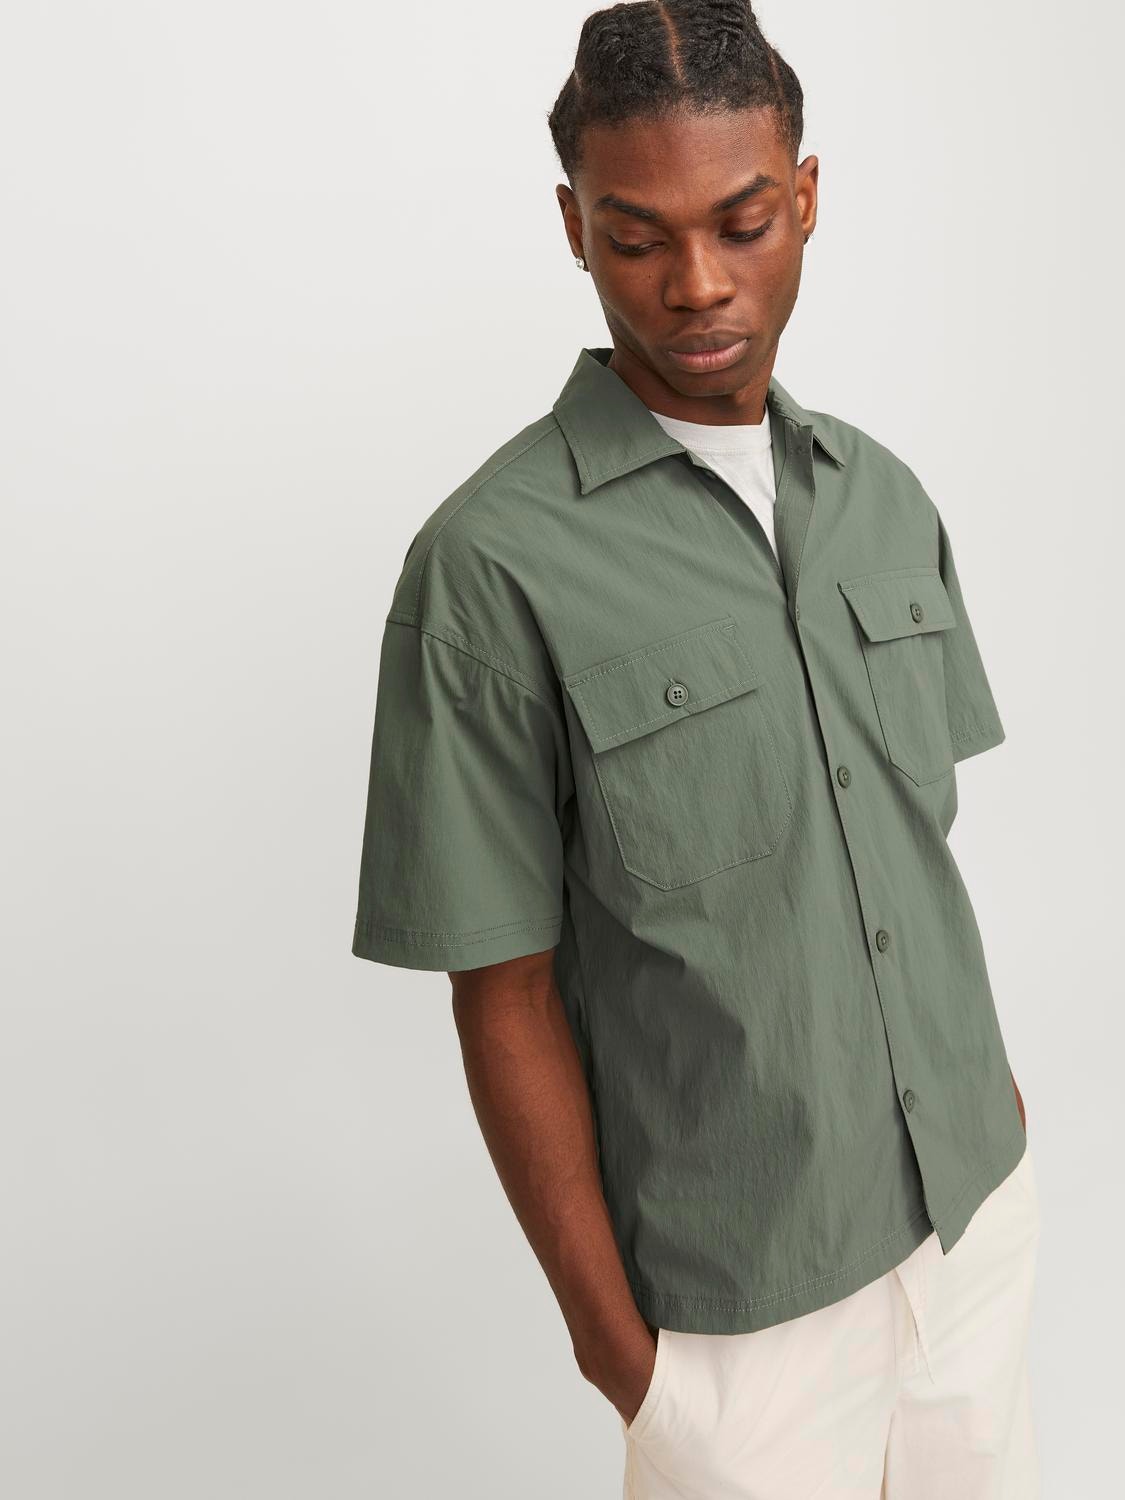 Jack & Jones Relaxed Fit Shirt -Agave Green - 12251280